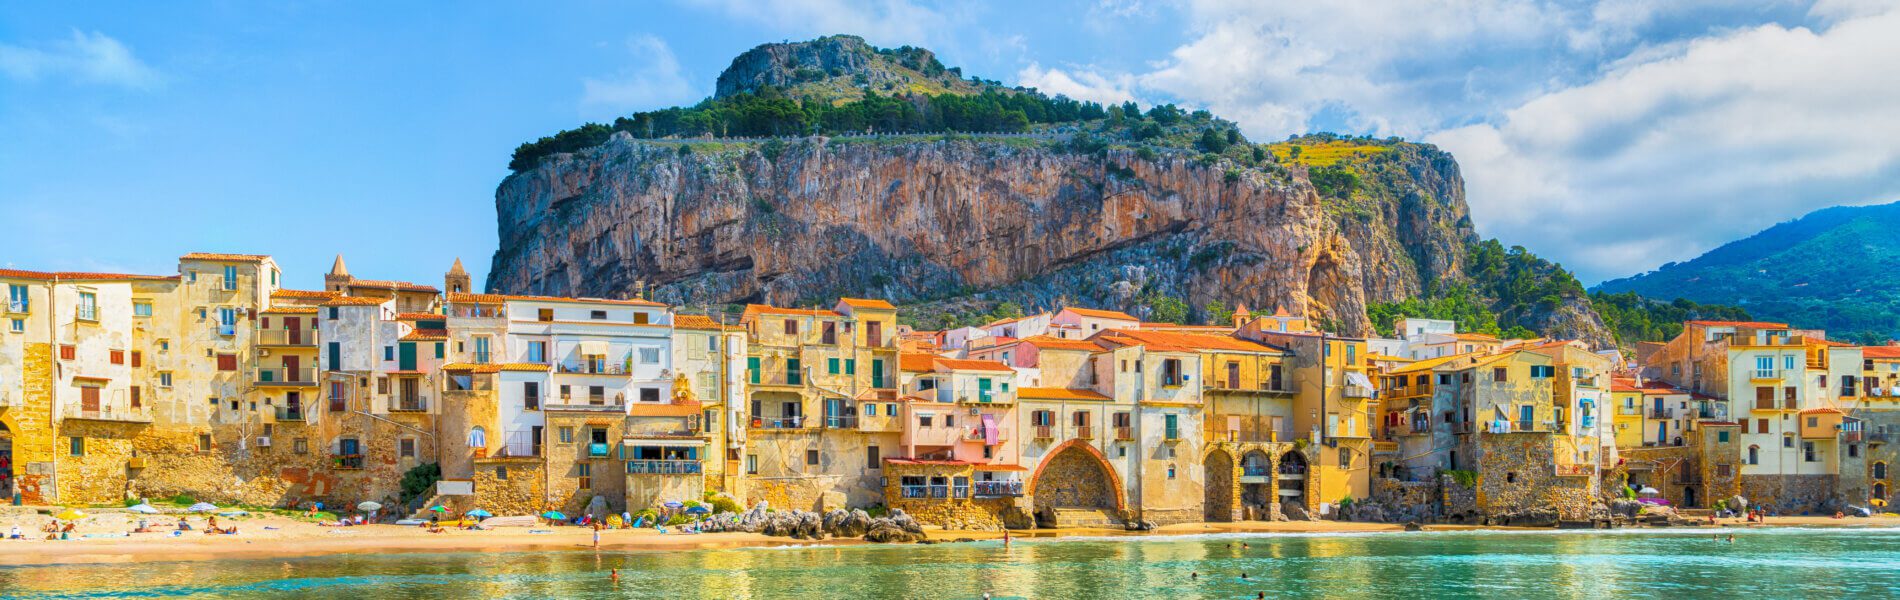 Cefalu,,Medieval,Village,Of,Sicily,Island,,Province,Of,Palermo,,Italy